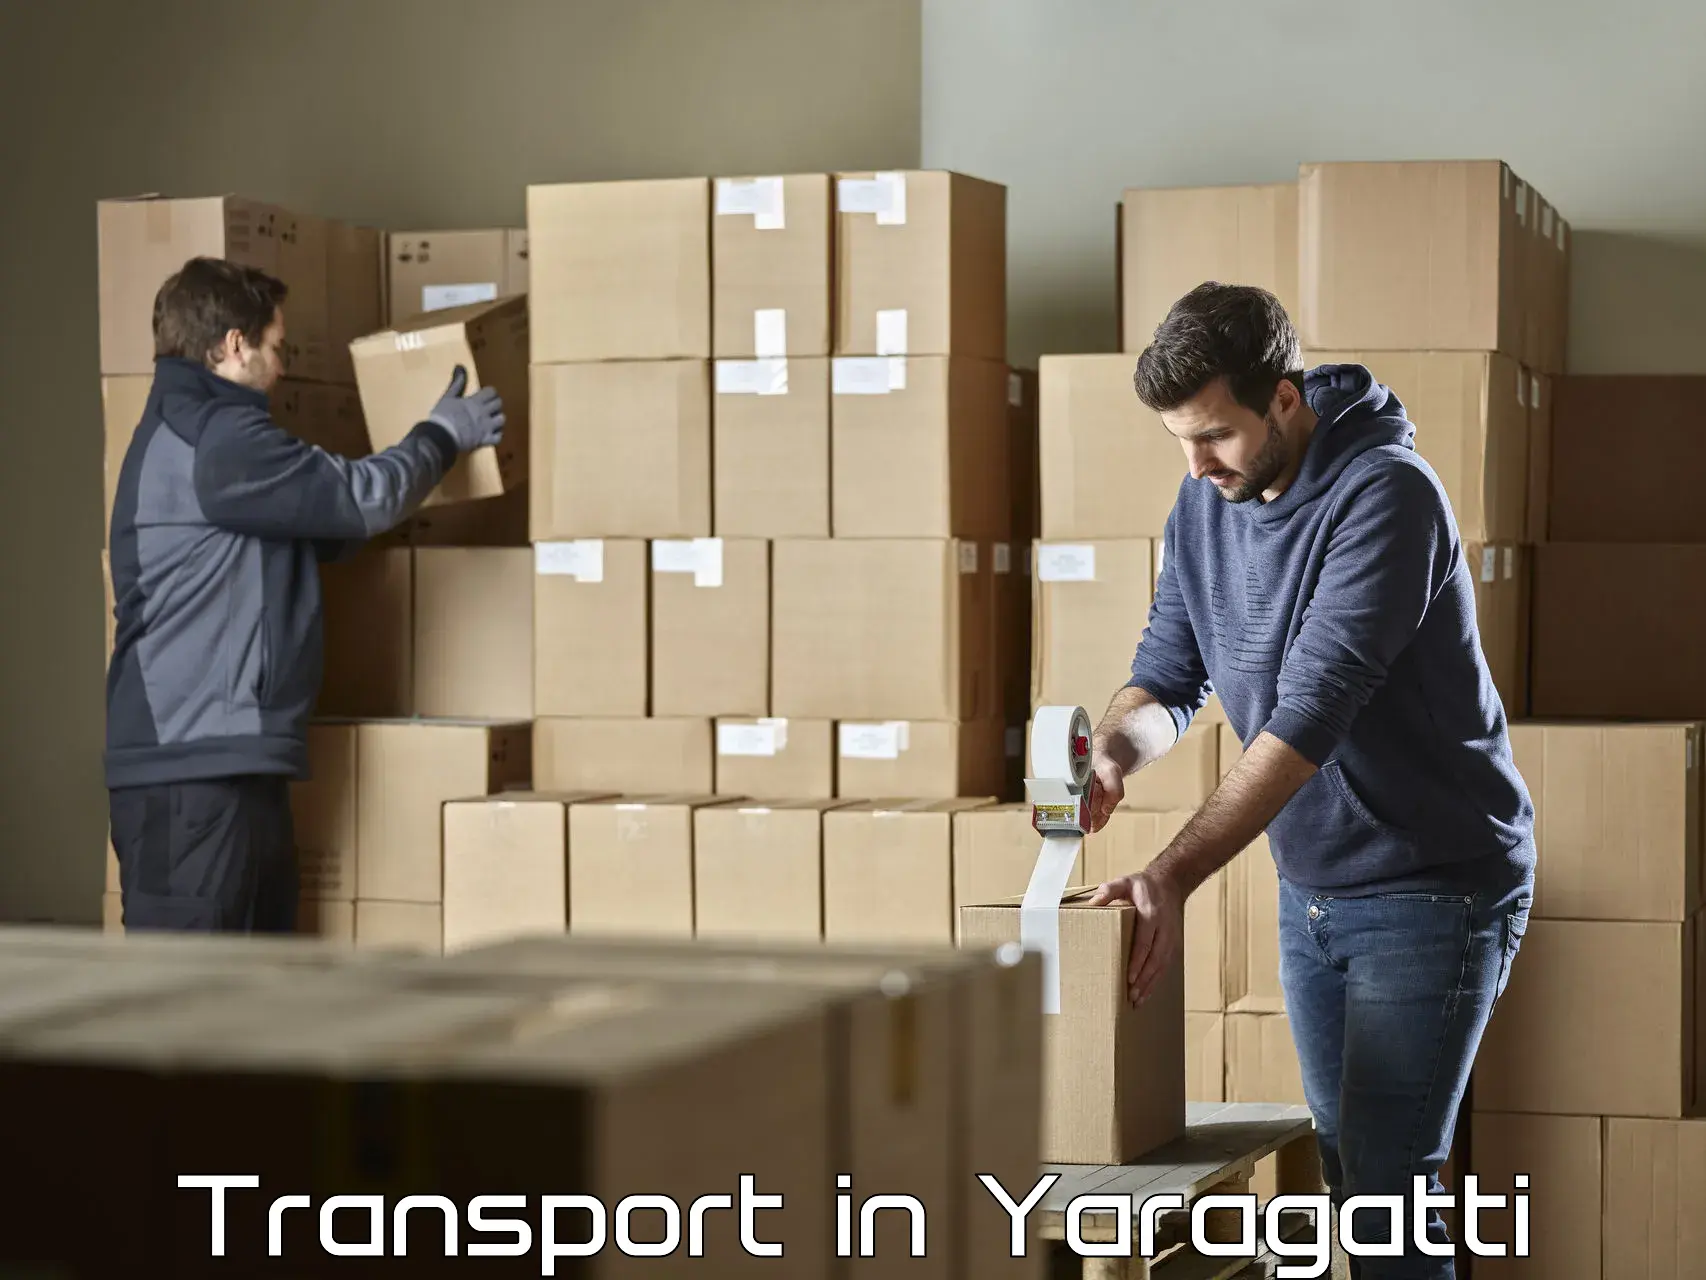 Container transport service in Yaragatti